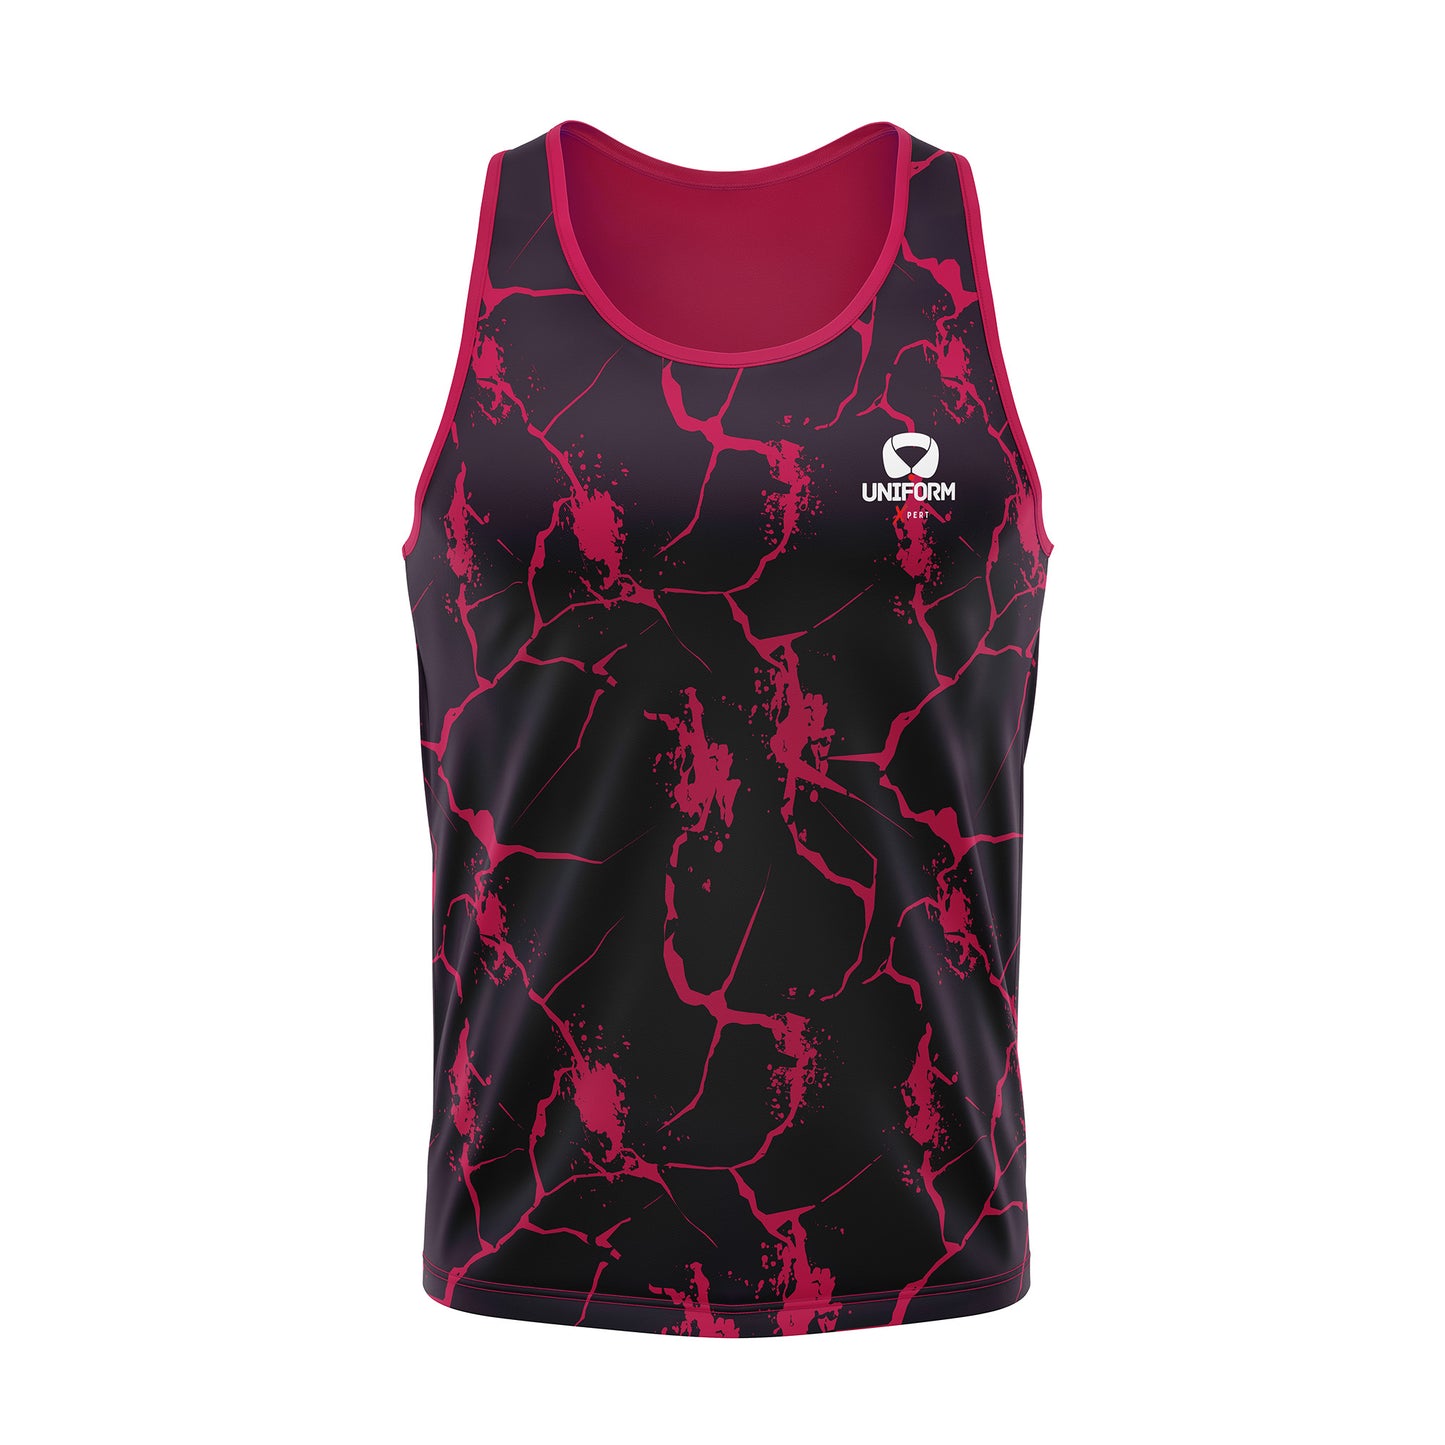 Customize Your Tank Top | Premium Sportswear for Active Individuals